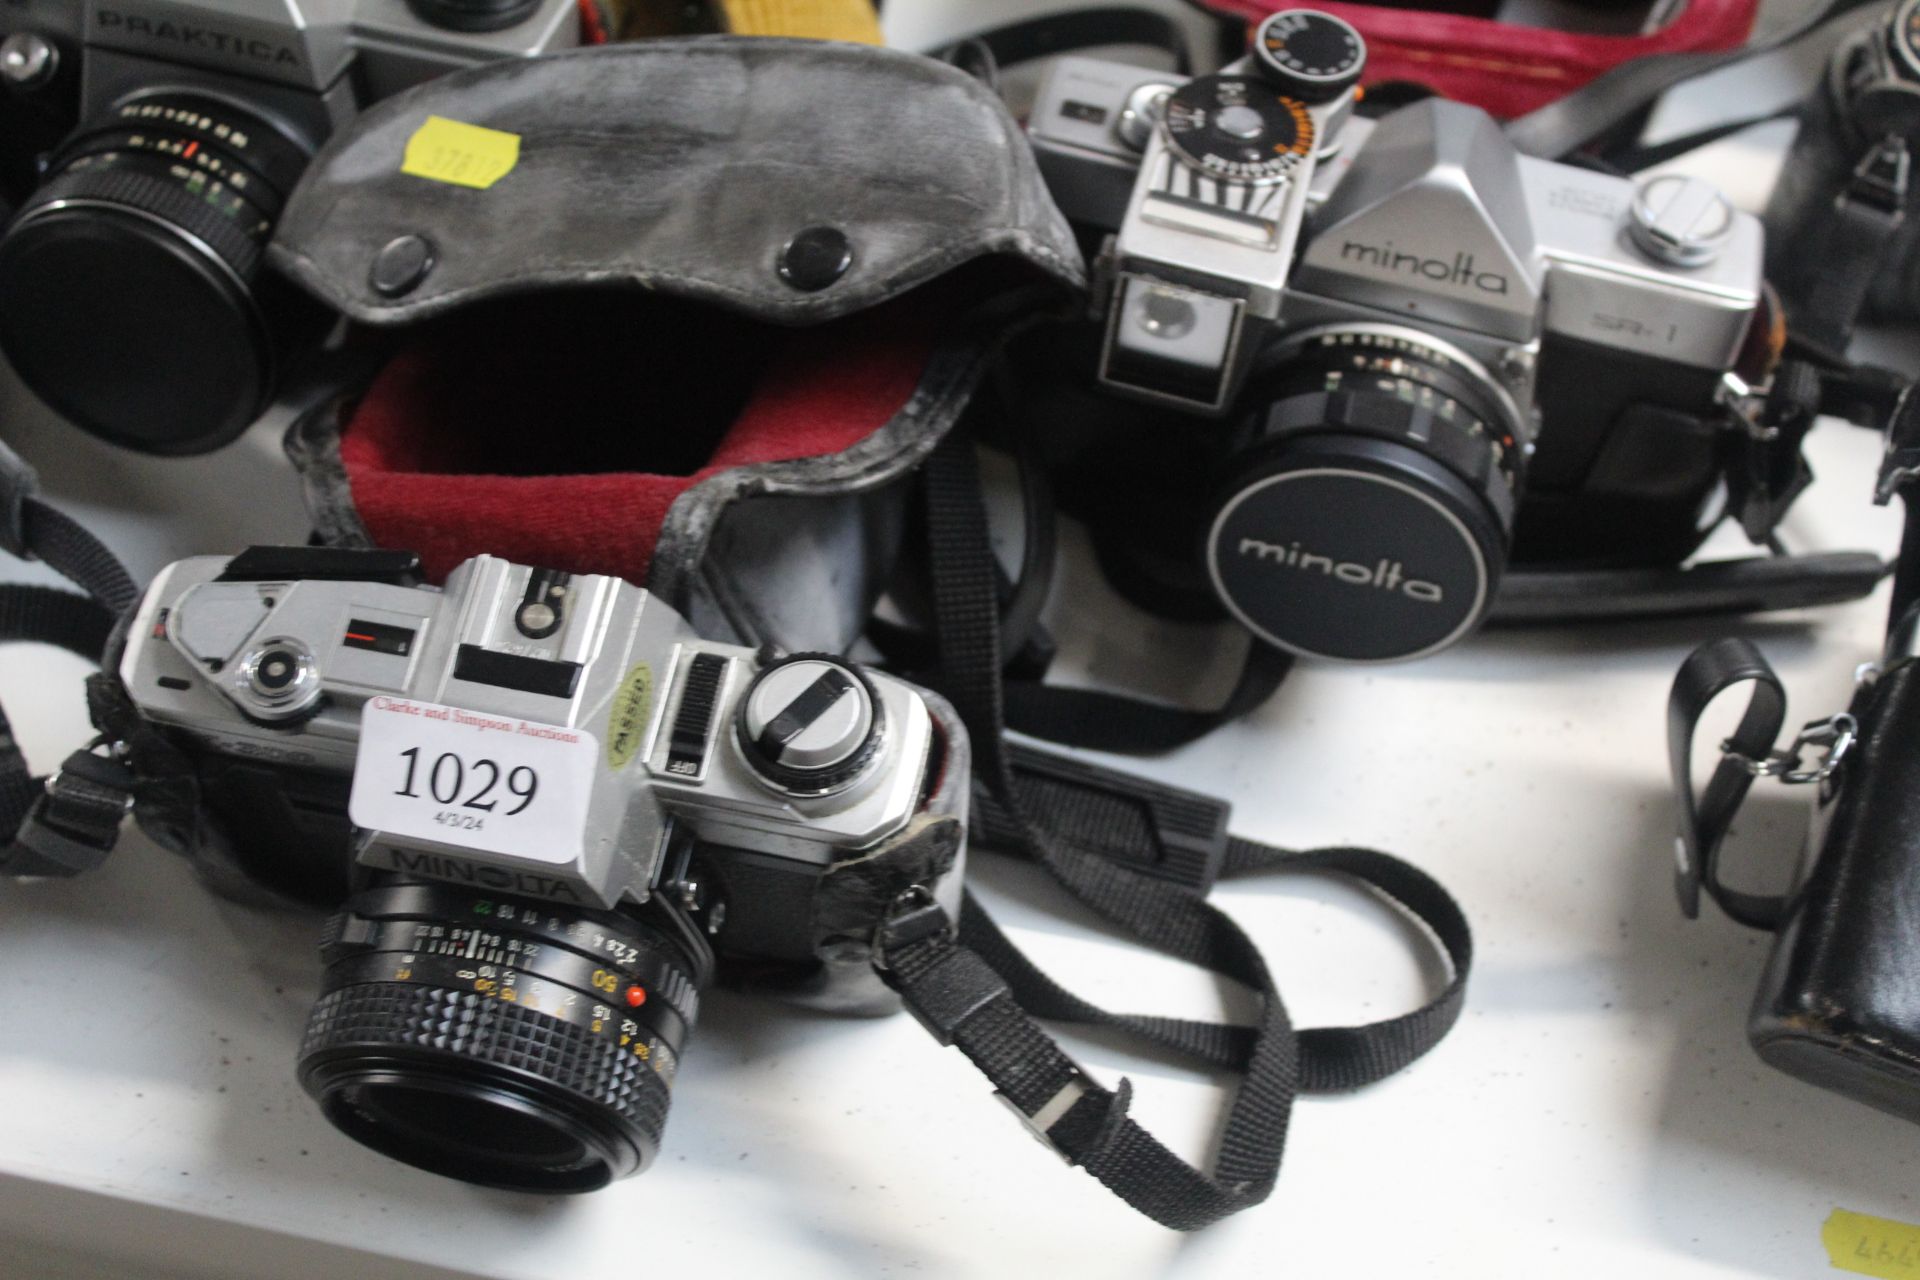 A quantity of cameras to include Canon, Yashica, Practika etc - Image 3 of 4